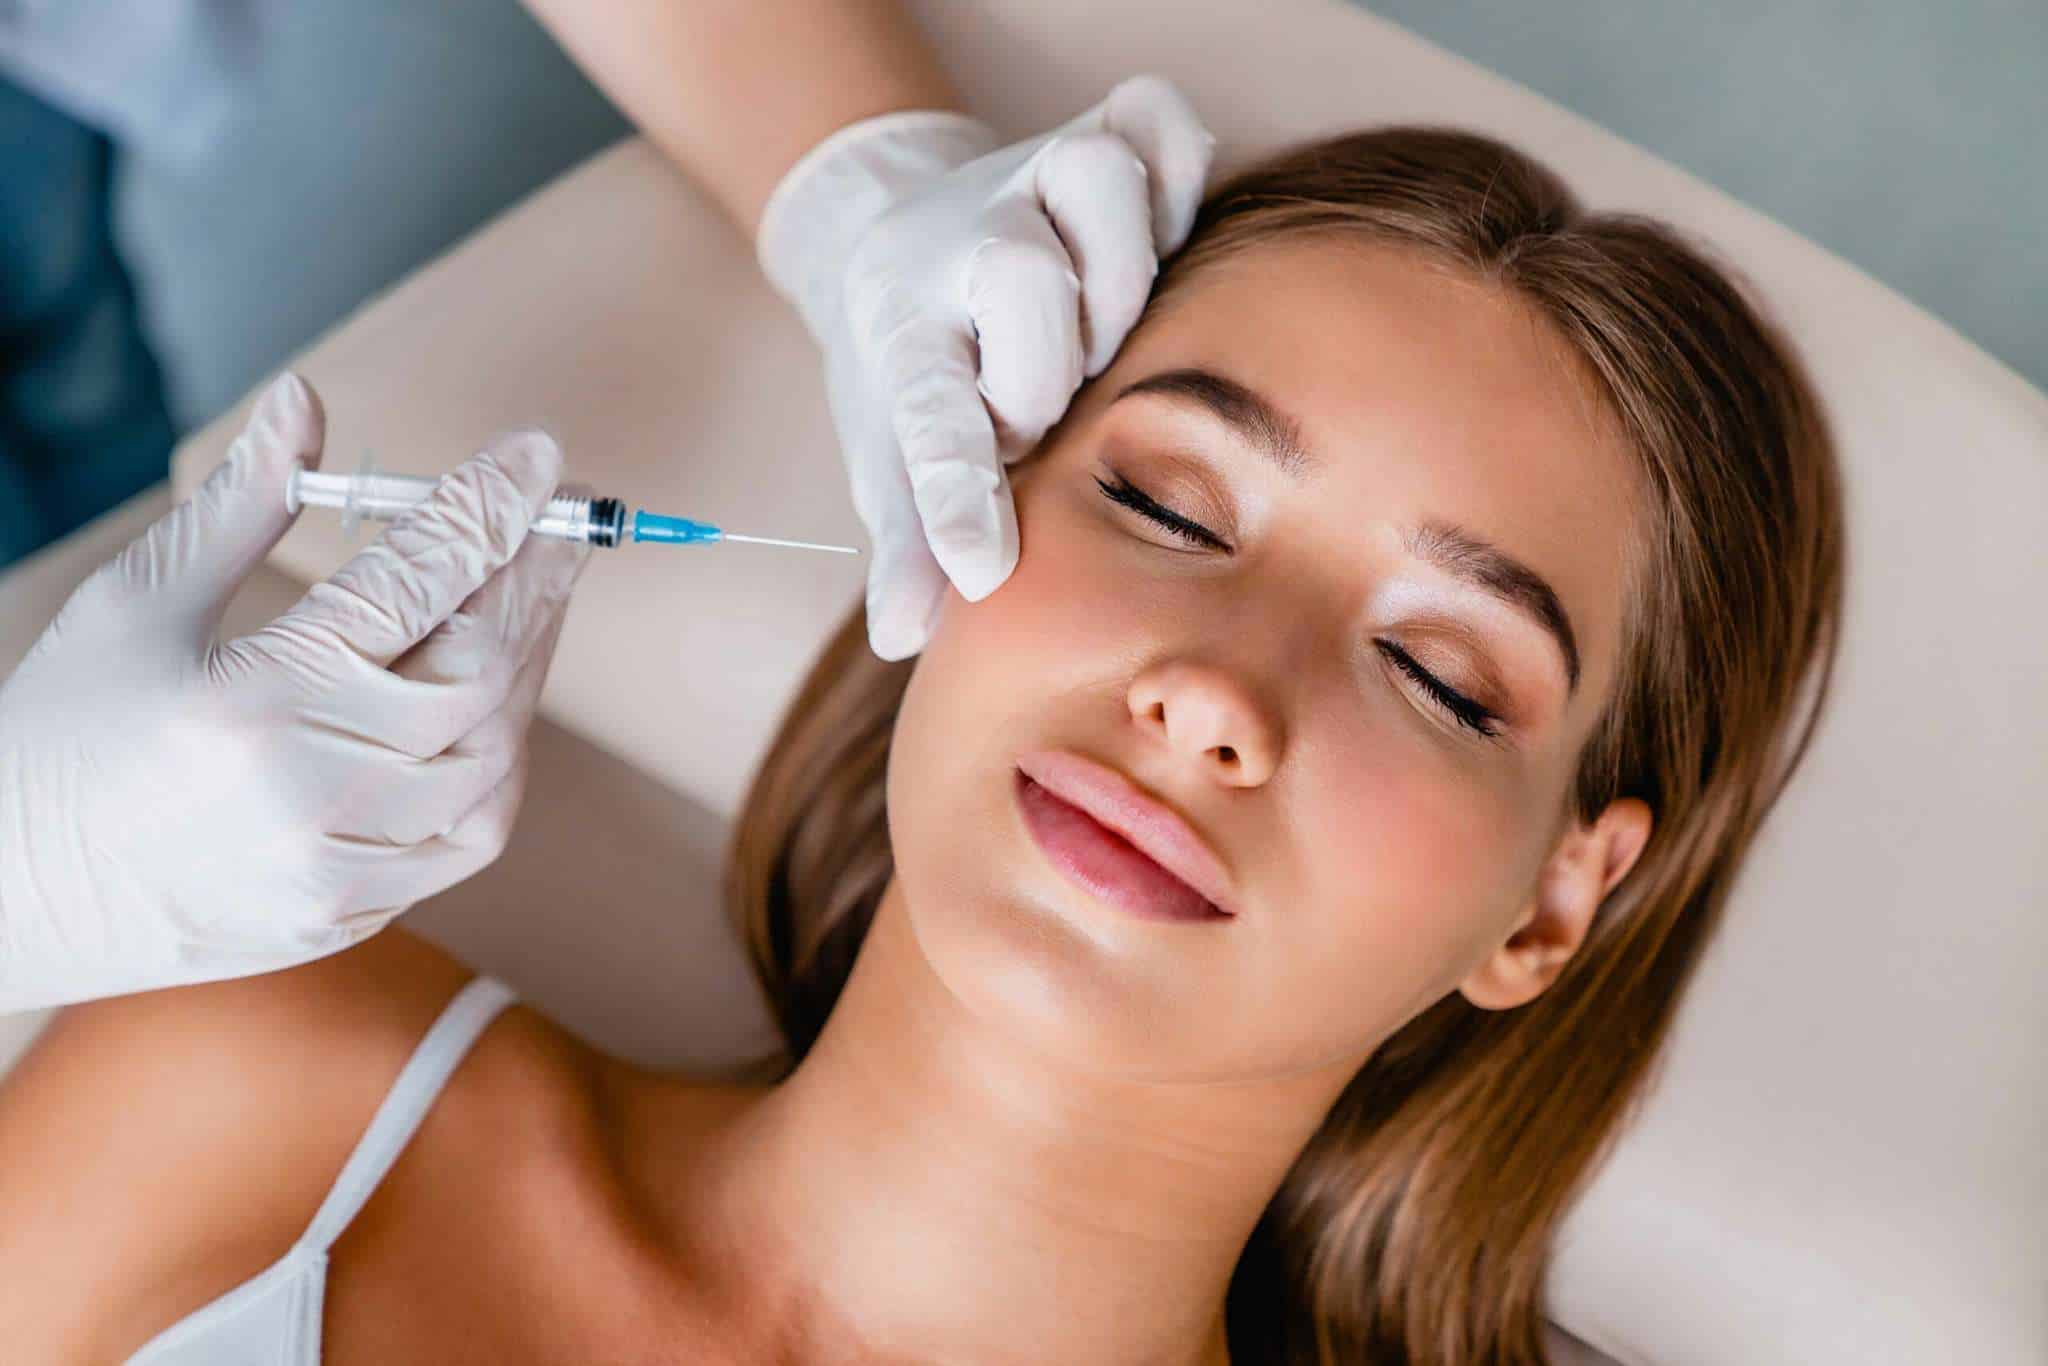 Sculptra Injections in Glendale, Encino, and Irvine, CA | New Look Skin Center Medical Spa in Glendale, Encino and Irvine, CA